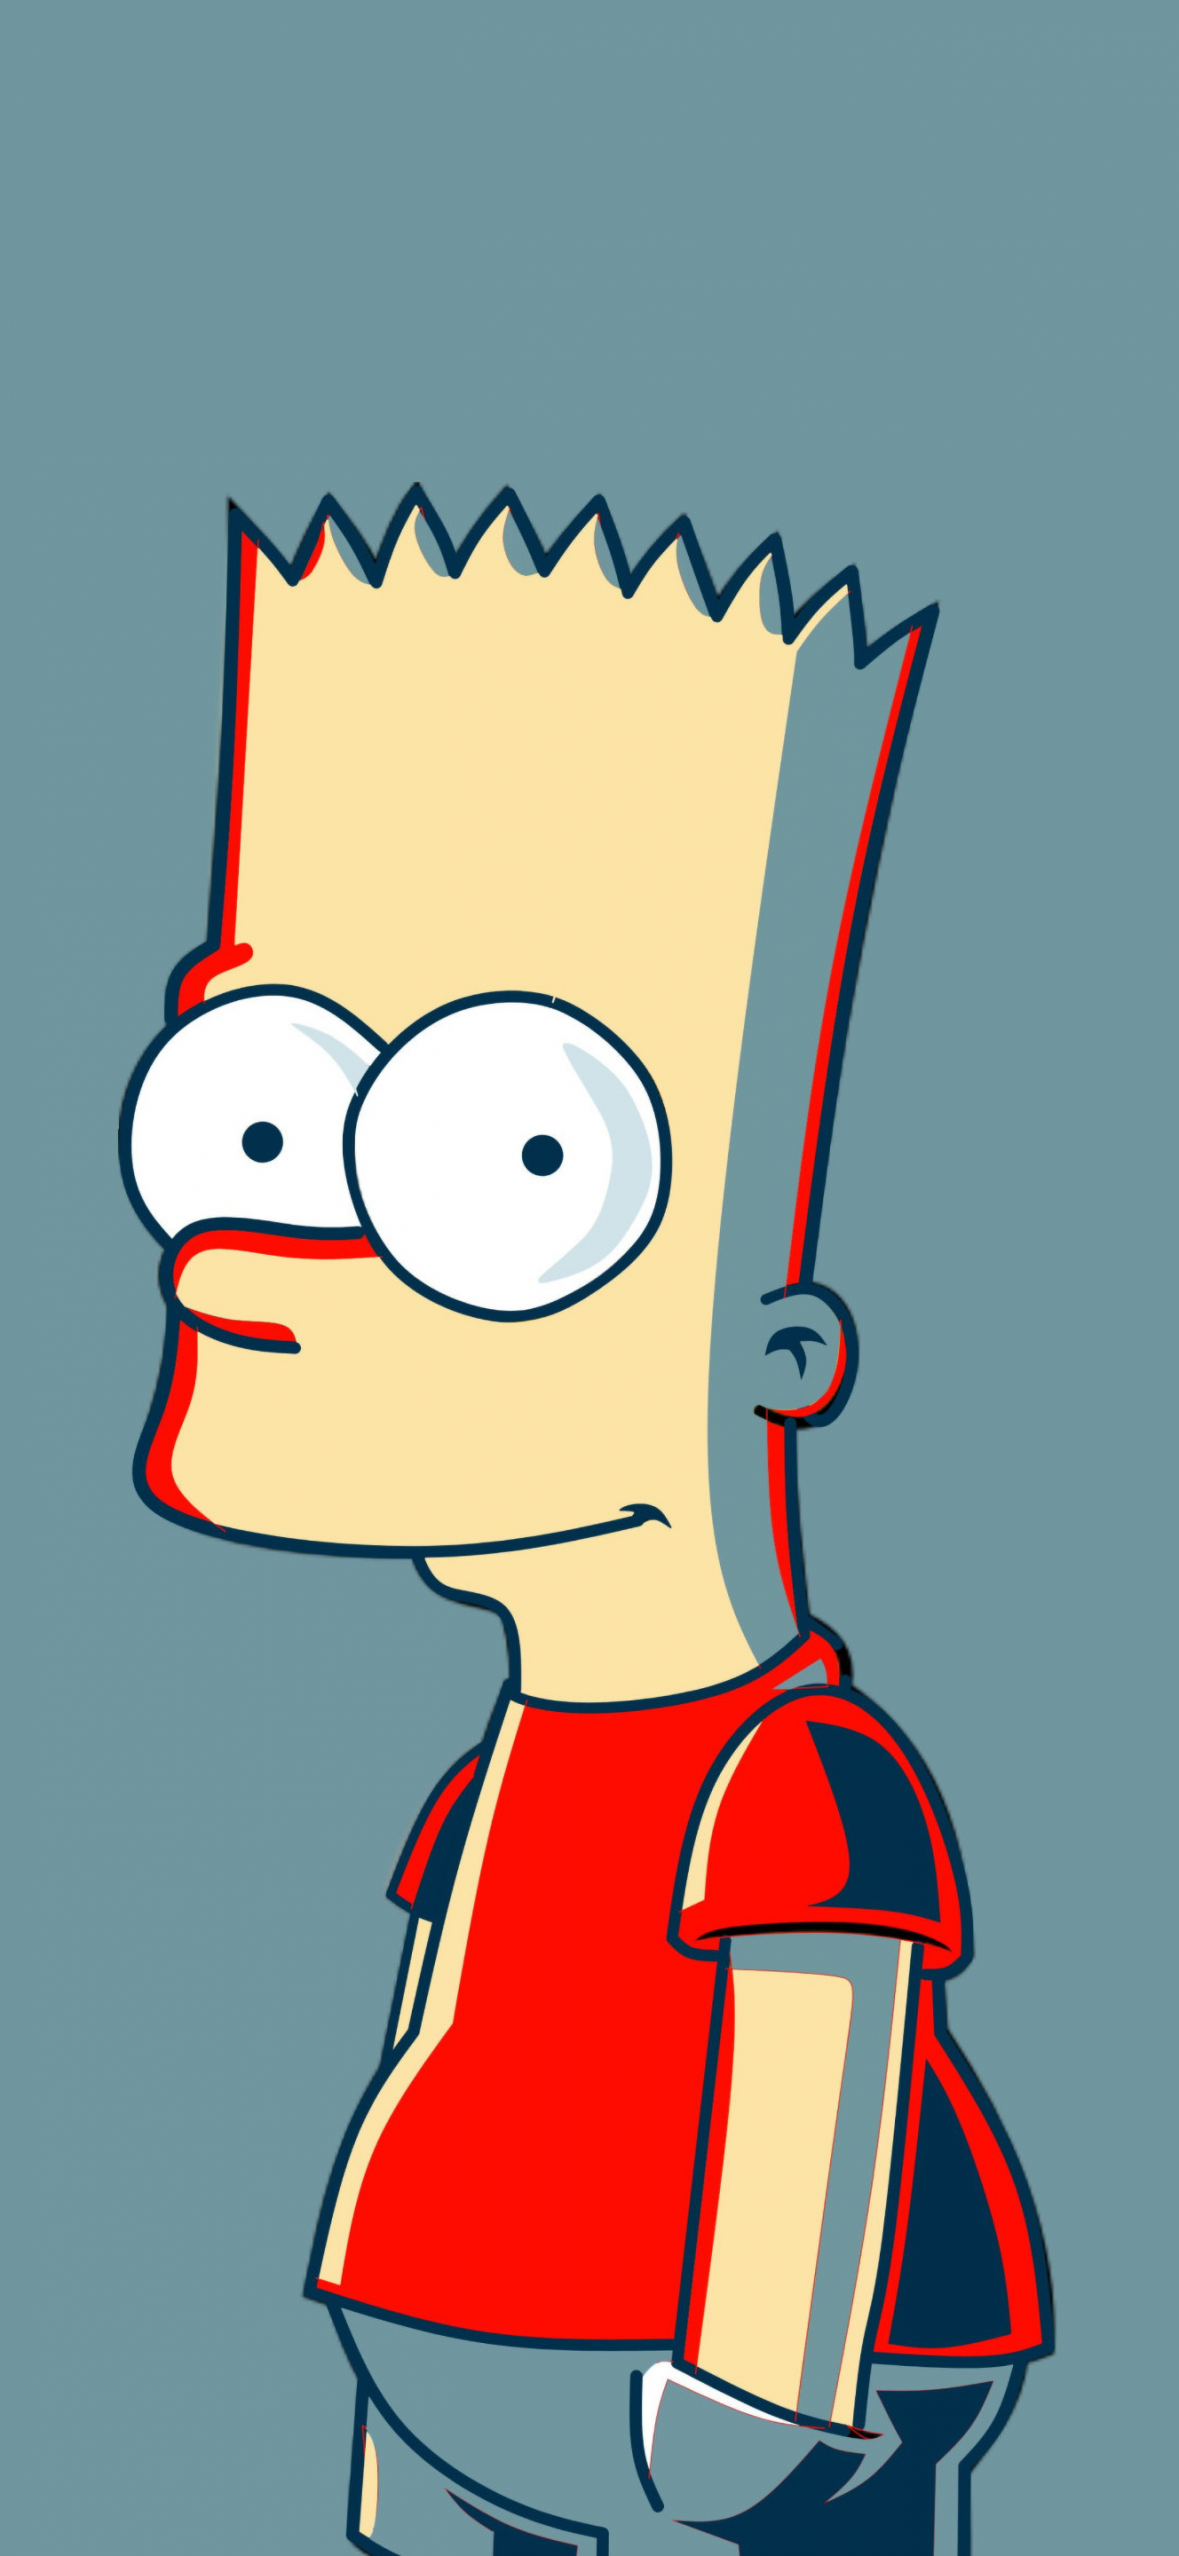 Bart Simpson In People Background 4K HD Bart Simpson Wallpapers  HD  Wallpapers  ID 70623